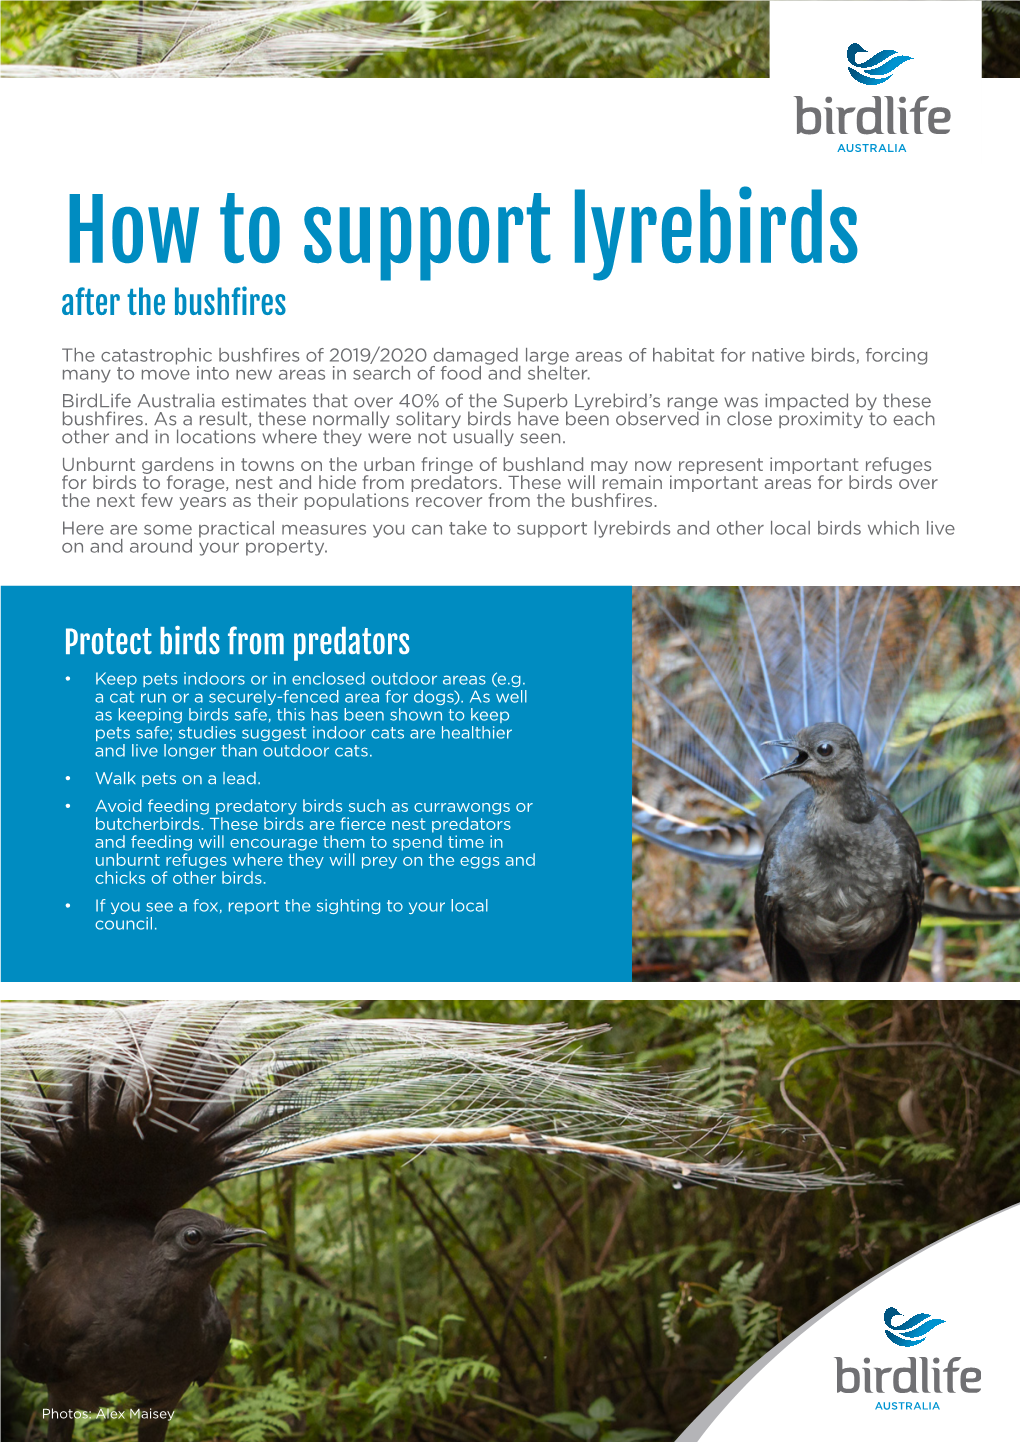 How to Support Lyrebirds After the Bushfires